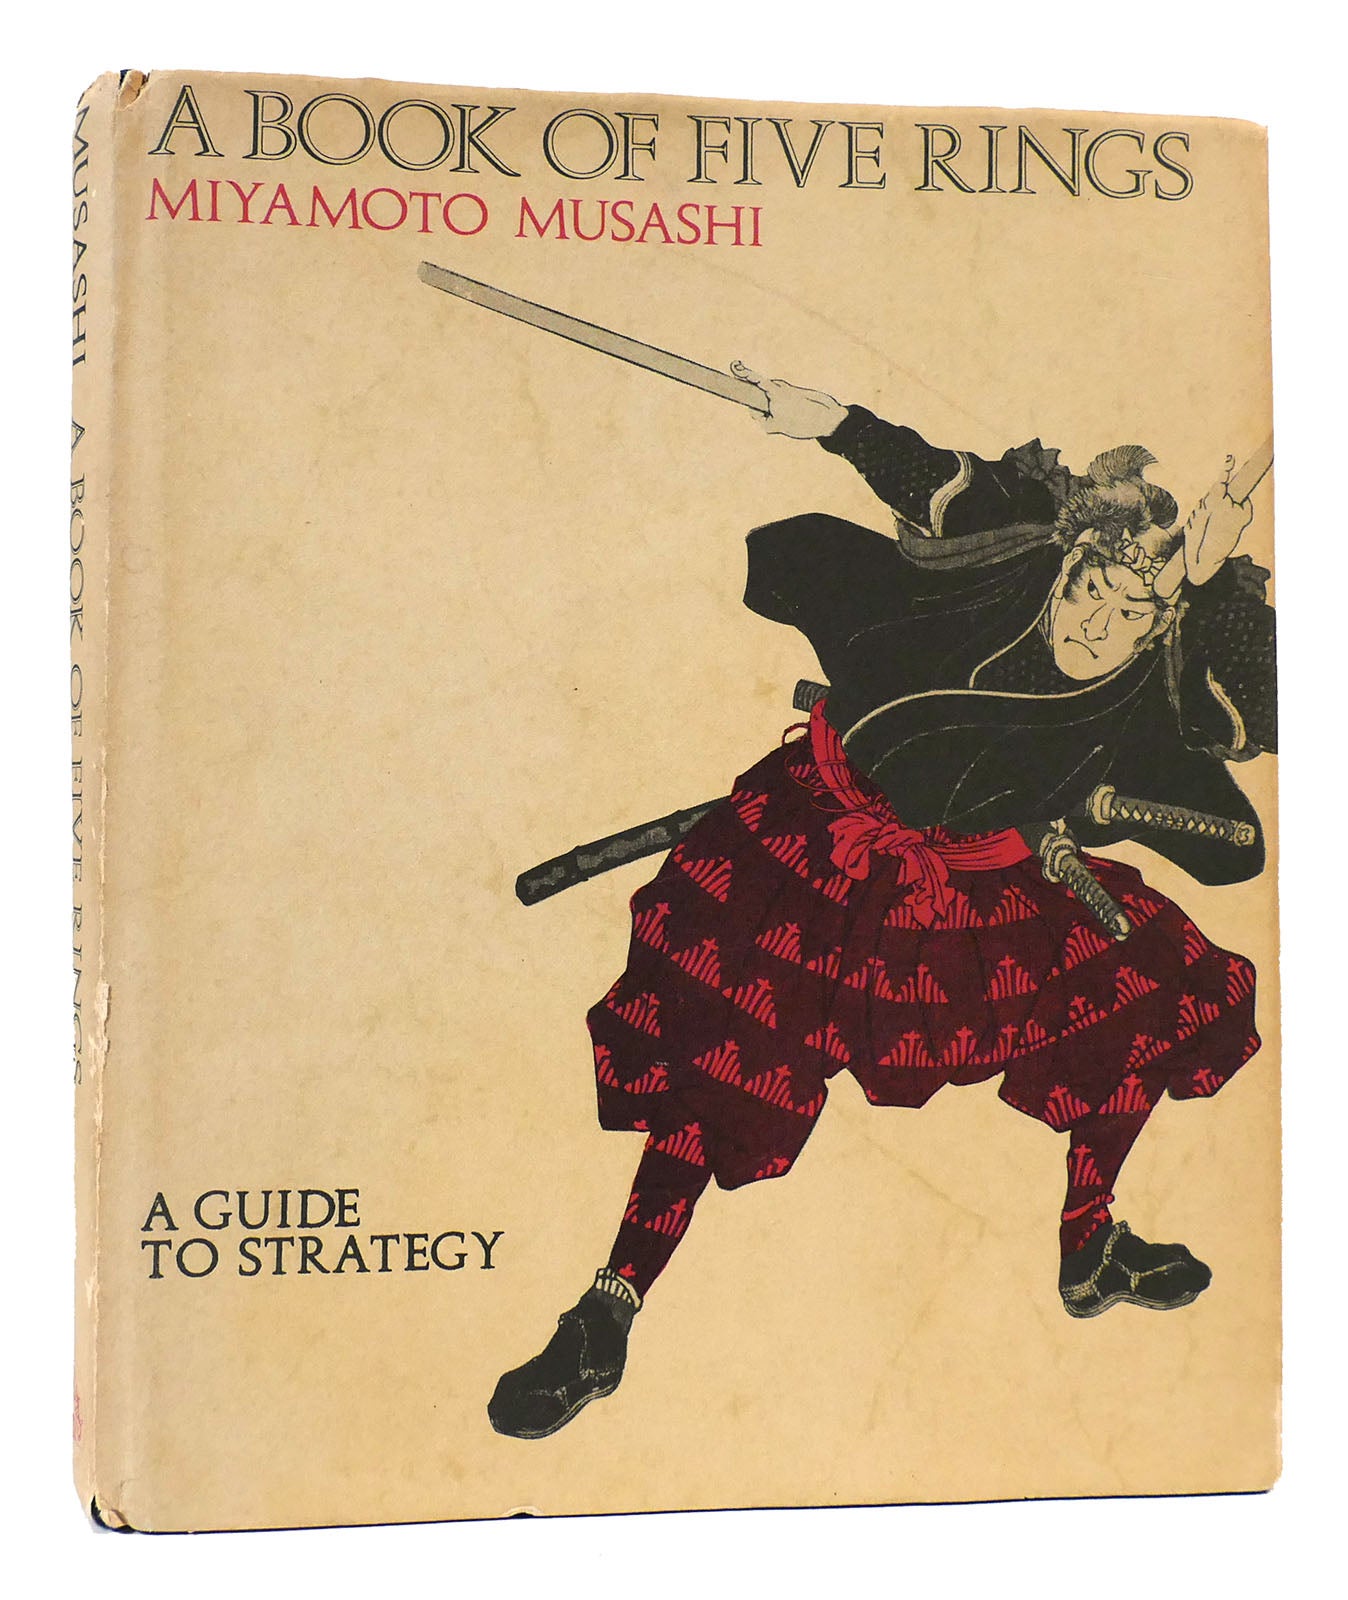 Amazon.com: The Book of Five Rings: The Original Classic (Annotated) eBook  : Mushashi, Miyamoto, SDG: Kindle Store